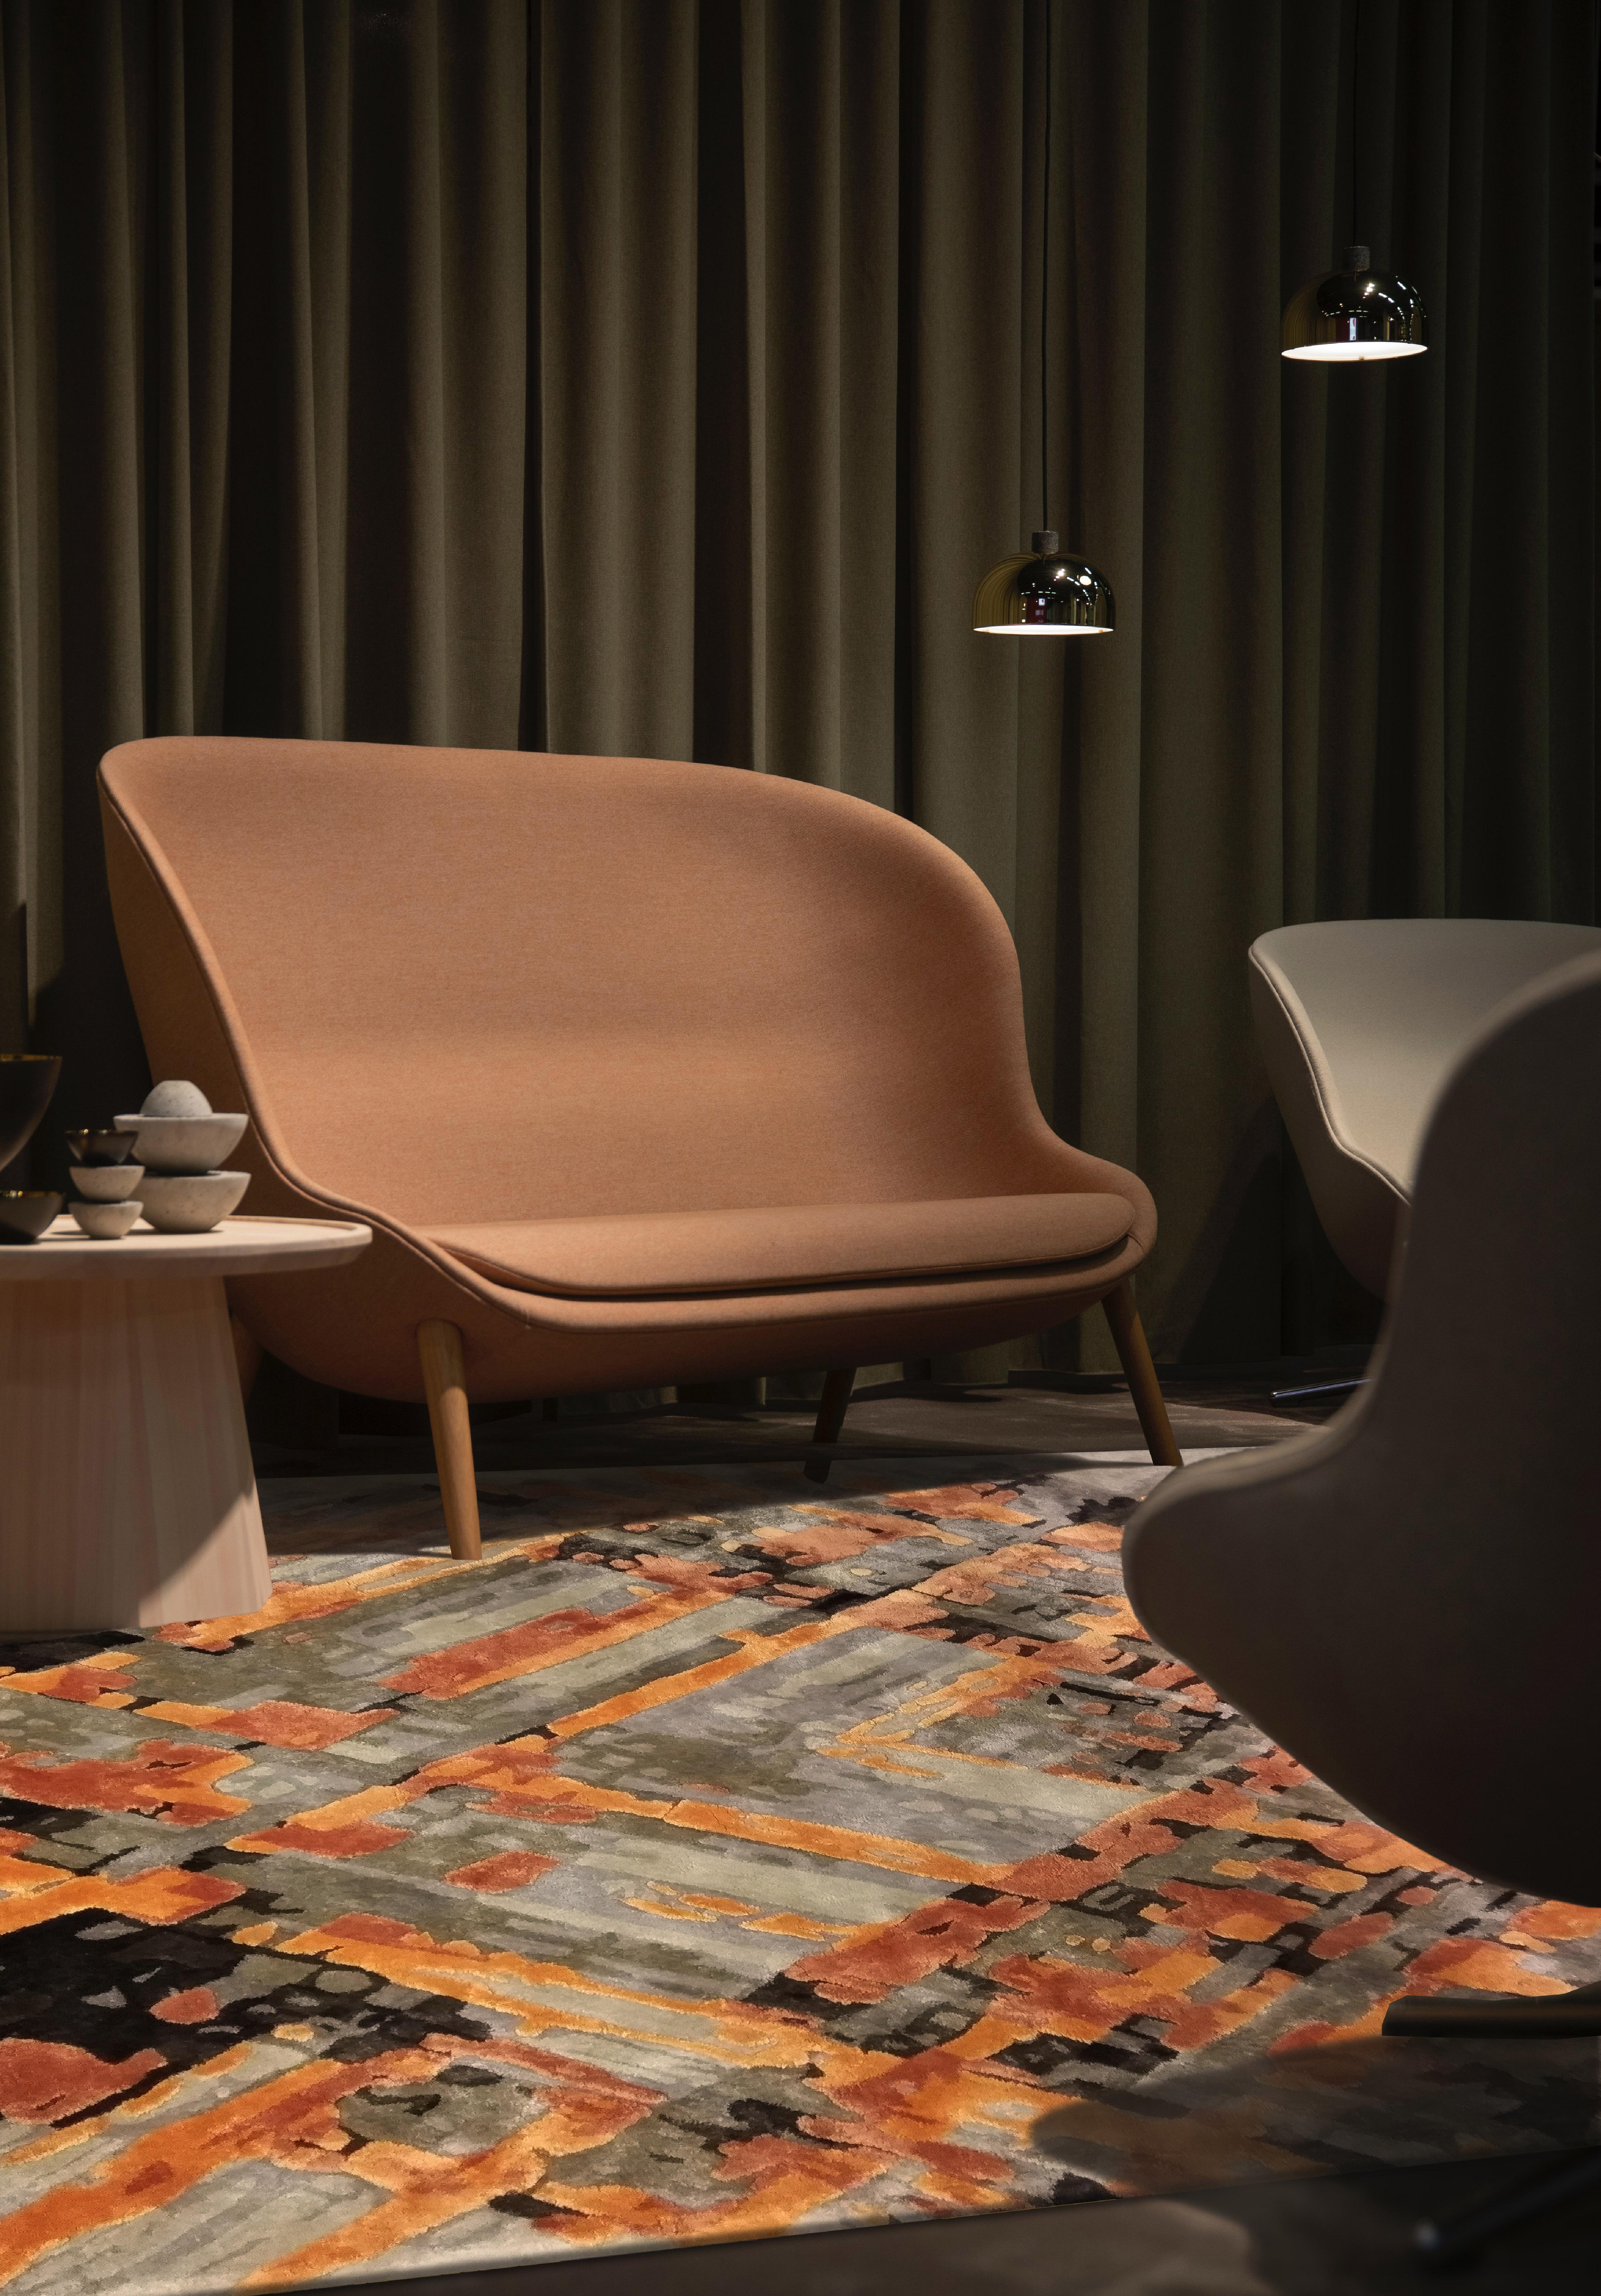 It is said that the right carpet can bring together different elements of space. Our Nouveau collection of carpet flooring is just that. Boasting of vibrant and abstract patterns, this modern carpet collection is one of our trendiest & most